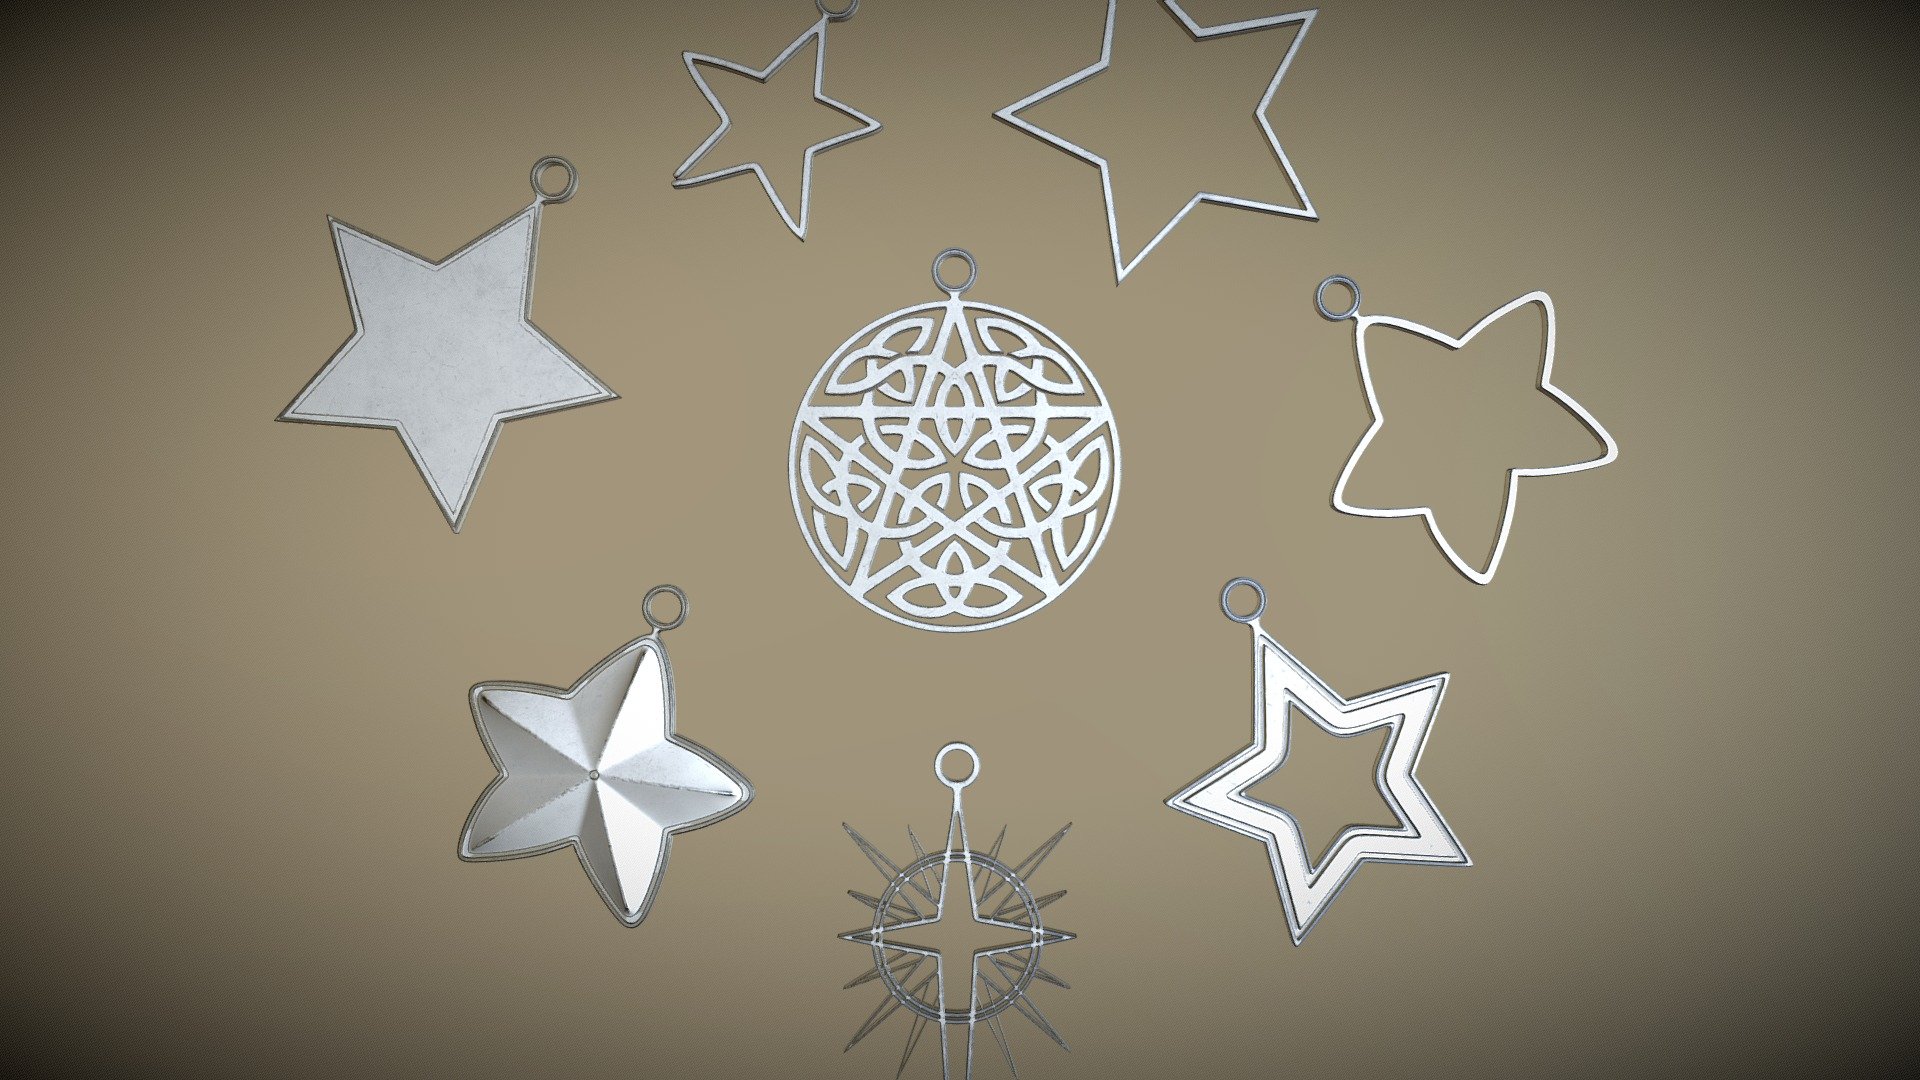 Stars - Printable Pendants.
Smooth printable models.
UV Unwrapped and textured. 
Comes with textures at 4096x4096 resolution. 

The model file contains 8 objects, 1 set of materials, and 1 set of textures. 
Modeled in Blender, painted in Substance Painter.

Blend file before modifiers has 13.648 Faces, and 13.748 Vertices.
.
My Gallery: https://edjan3d.wixsite.com/my-site - Stars - Printable Pendants - Buy Royalty Free 3D model by Ed.Jan 3d model